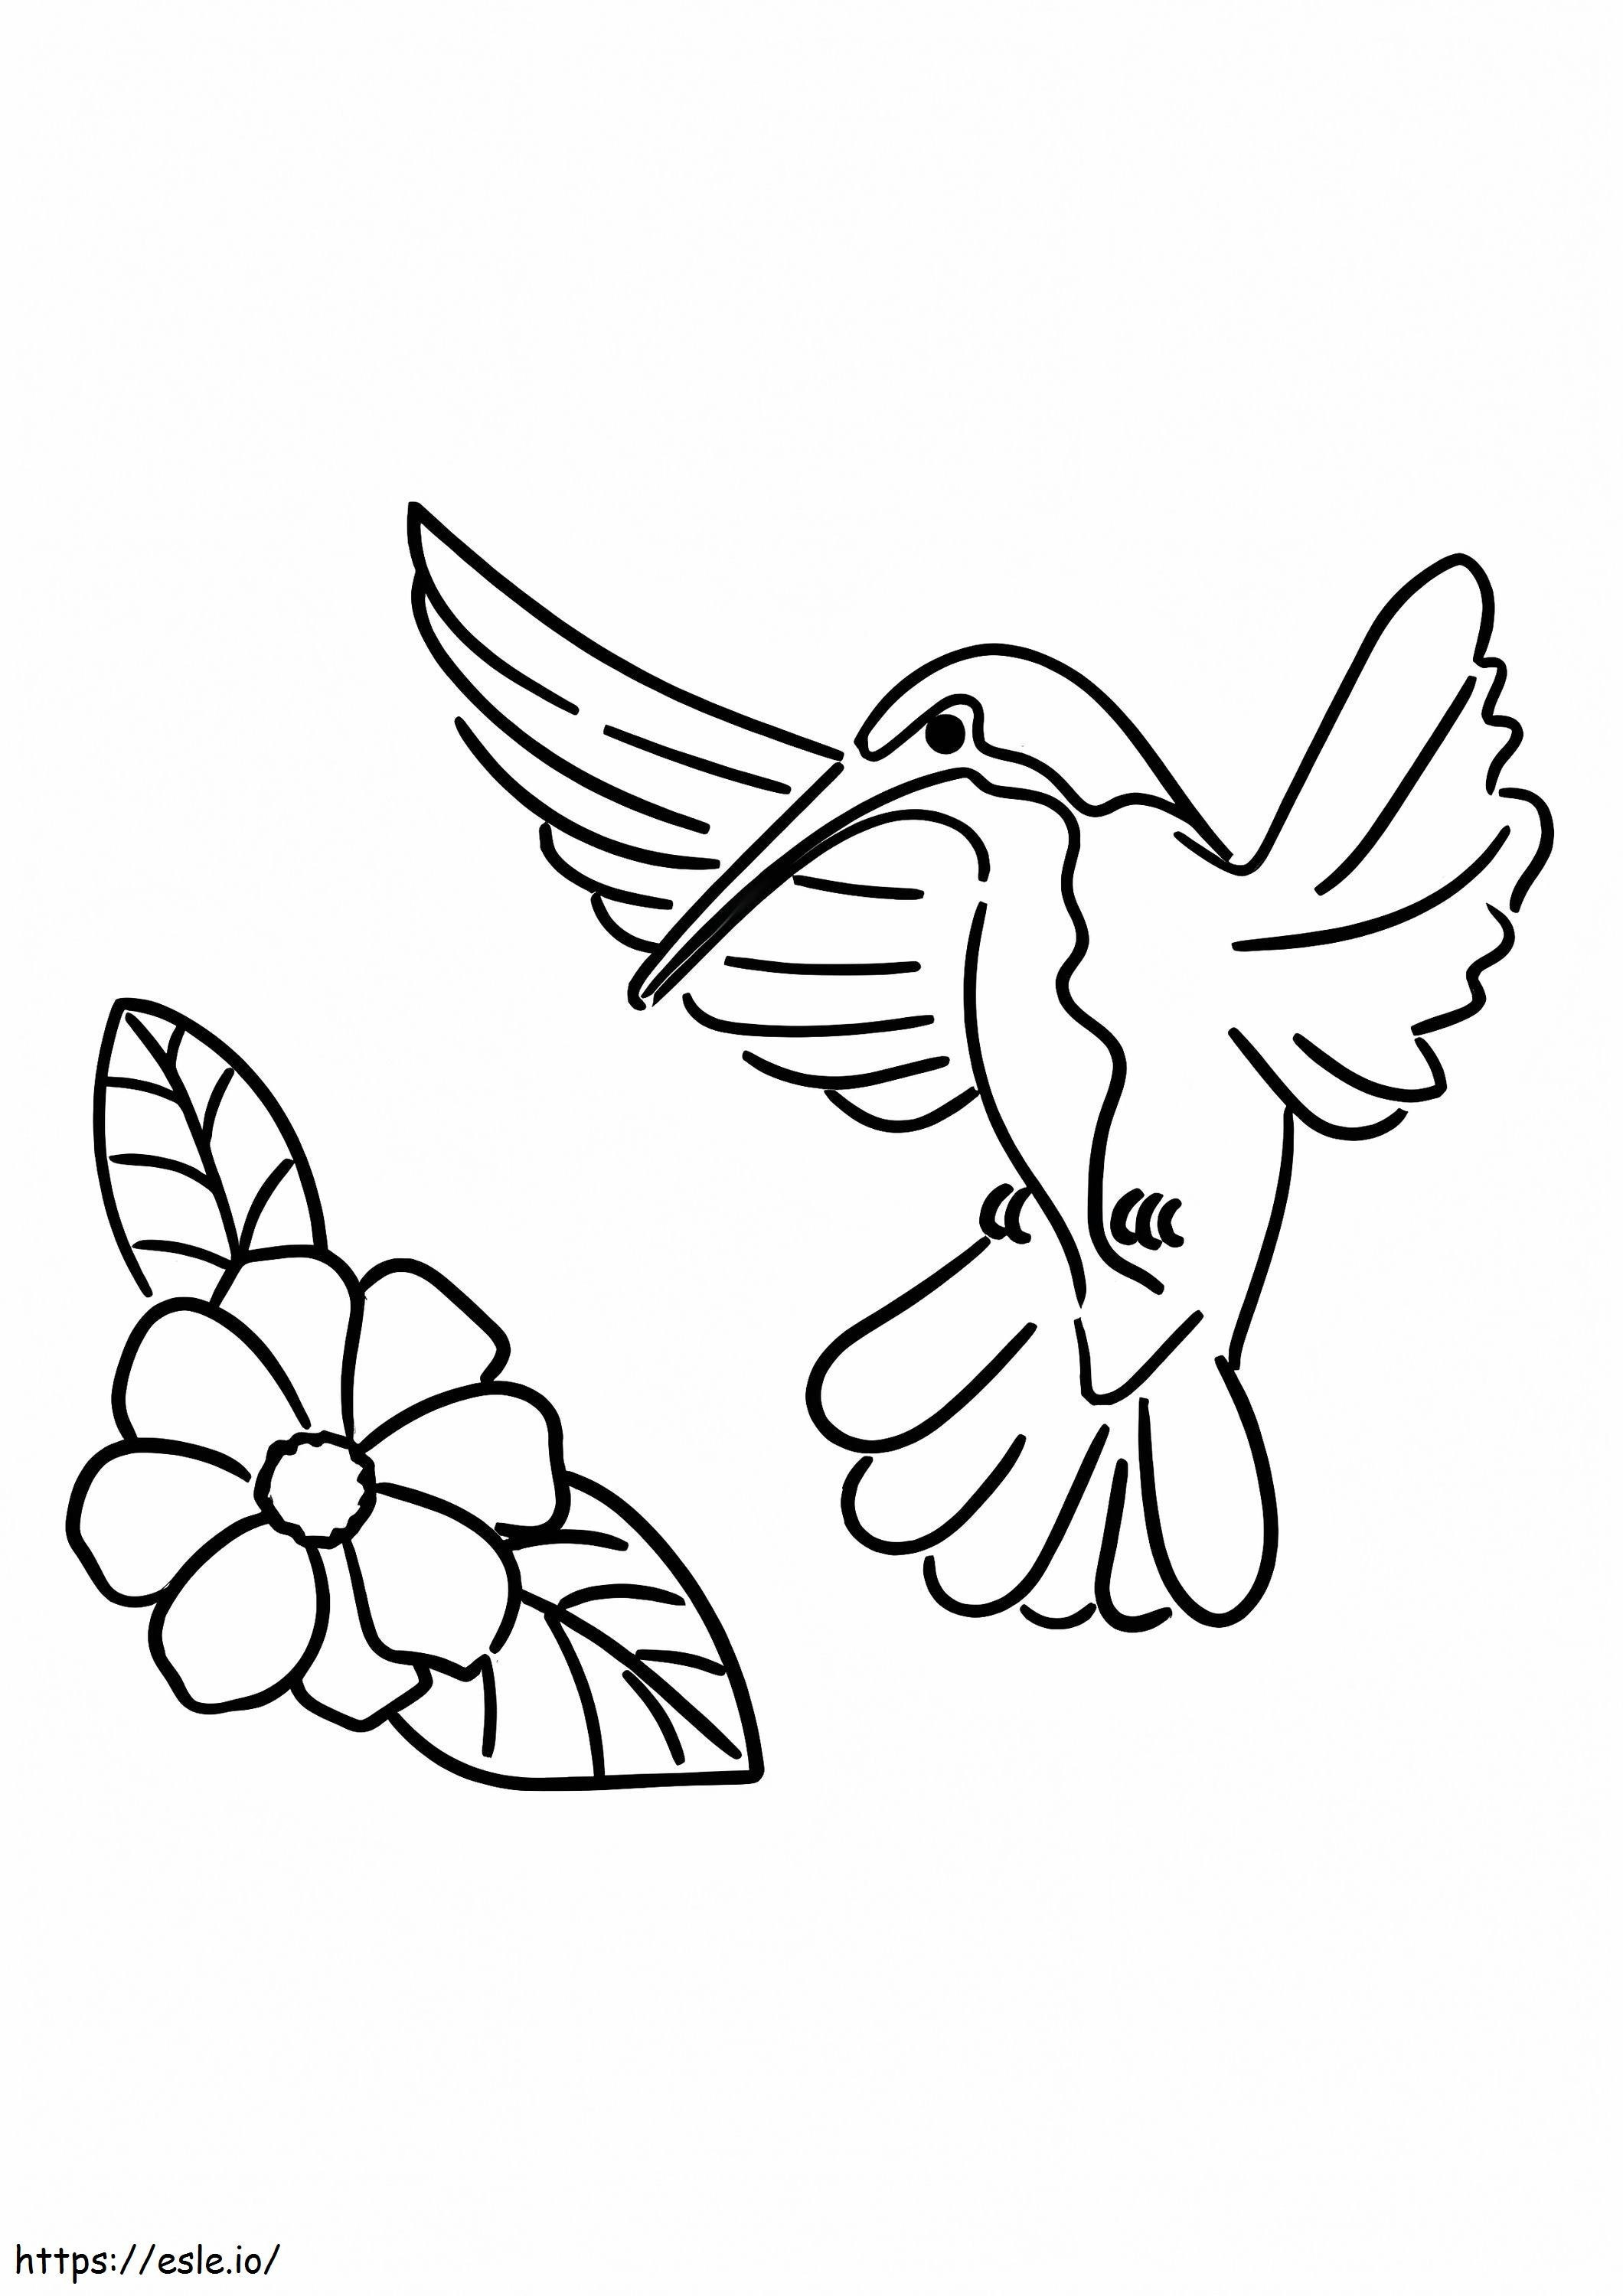 Hummingbird Flower And Leaf coloring page